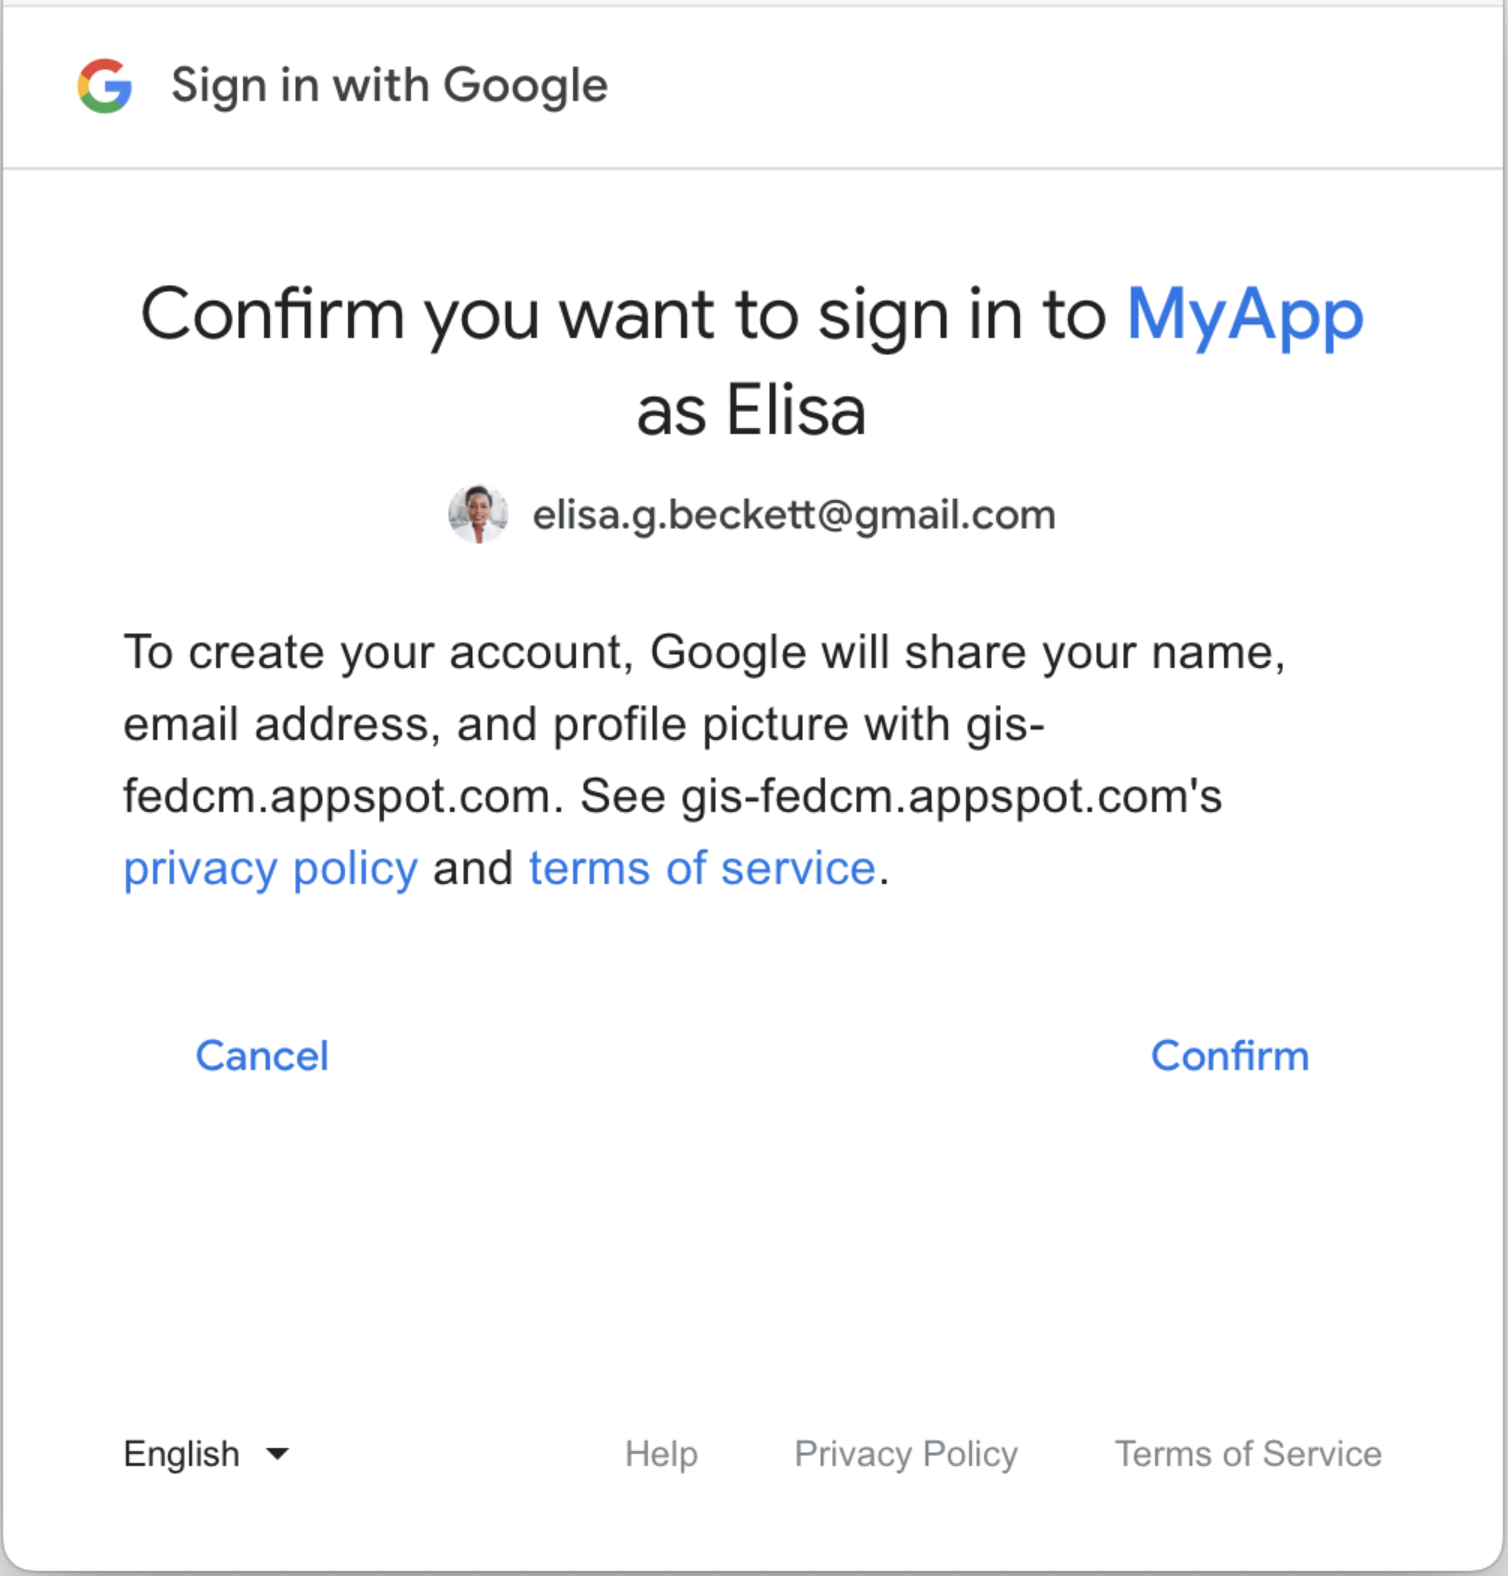 Sign in with Google button consent